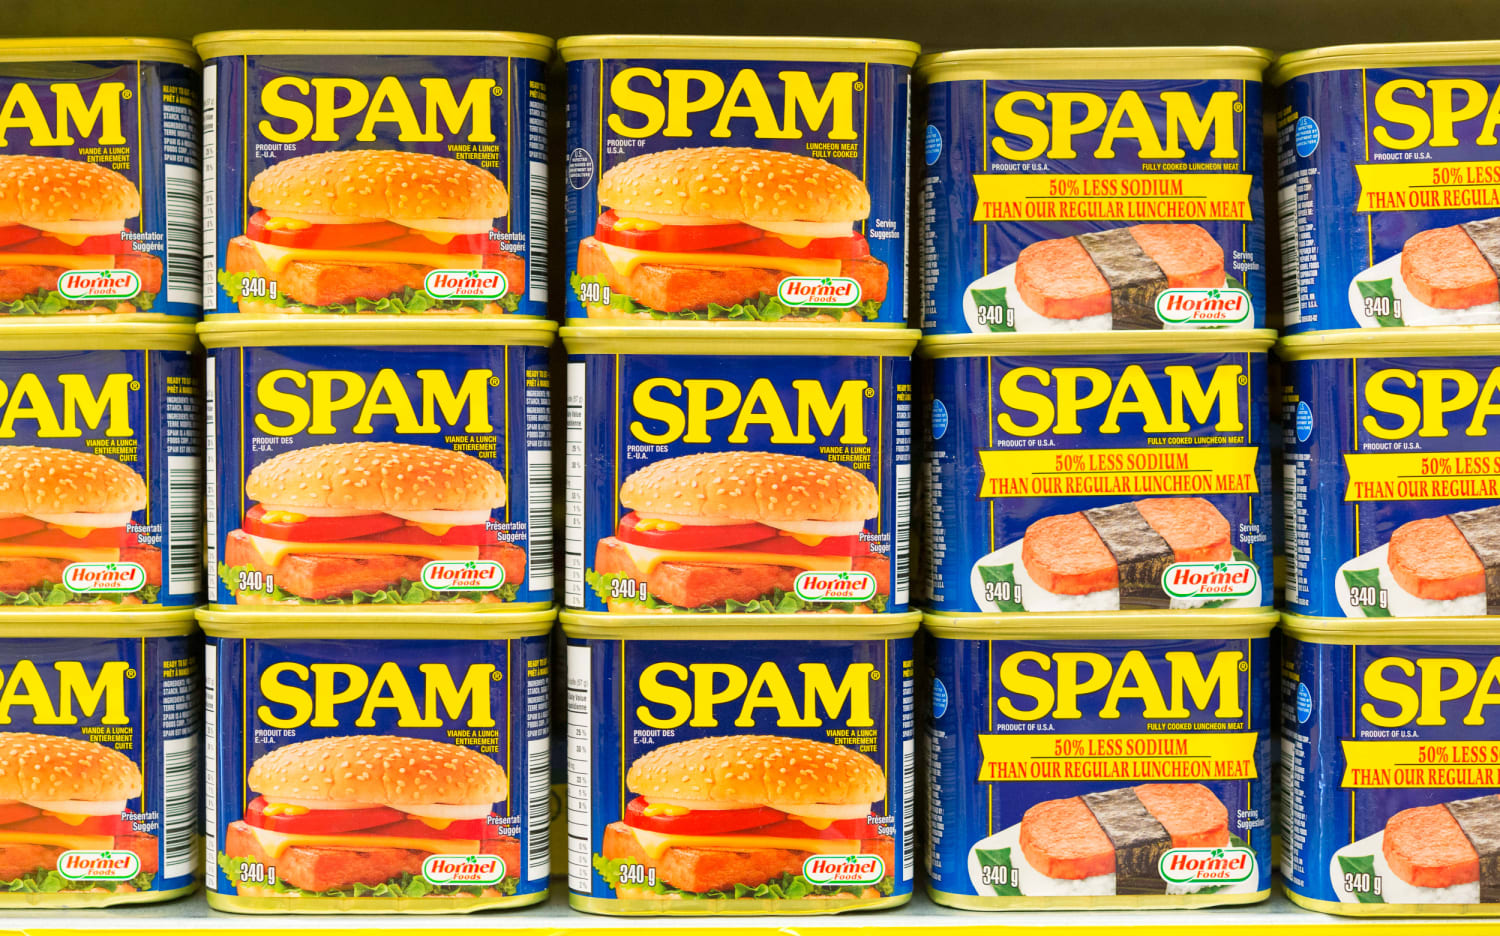 What Is Spam?